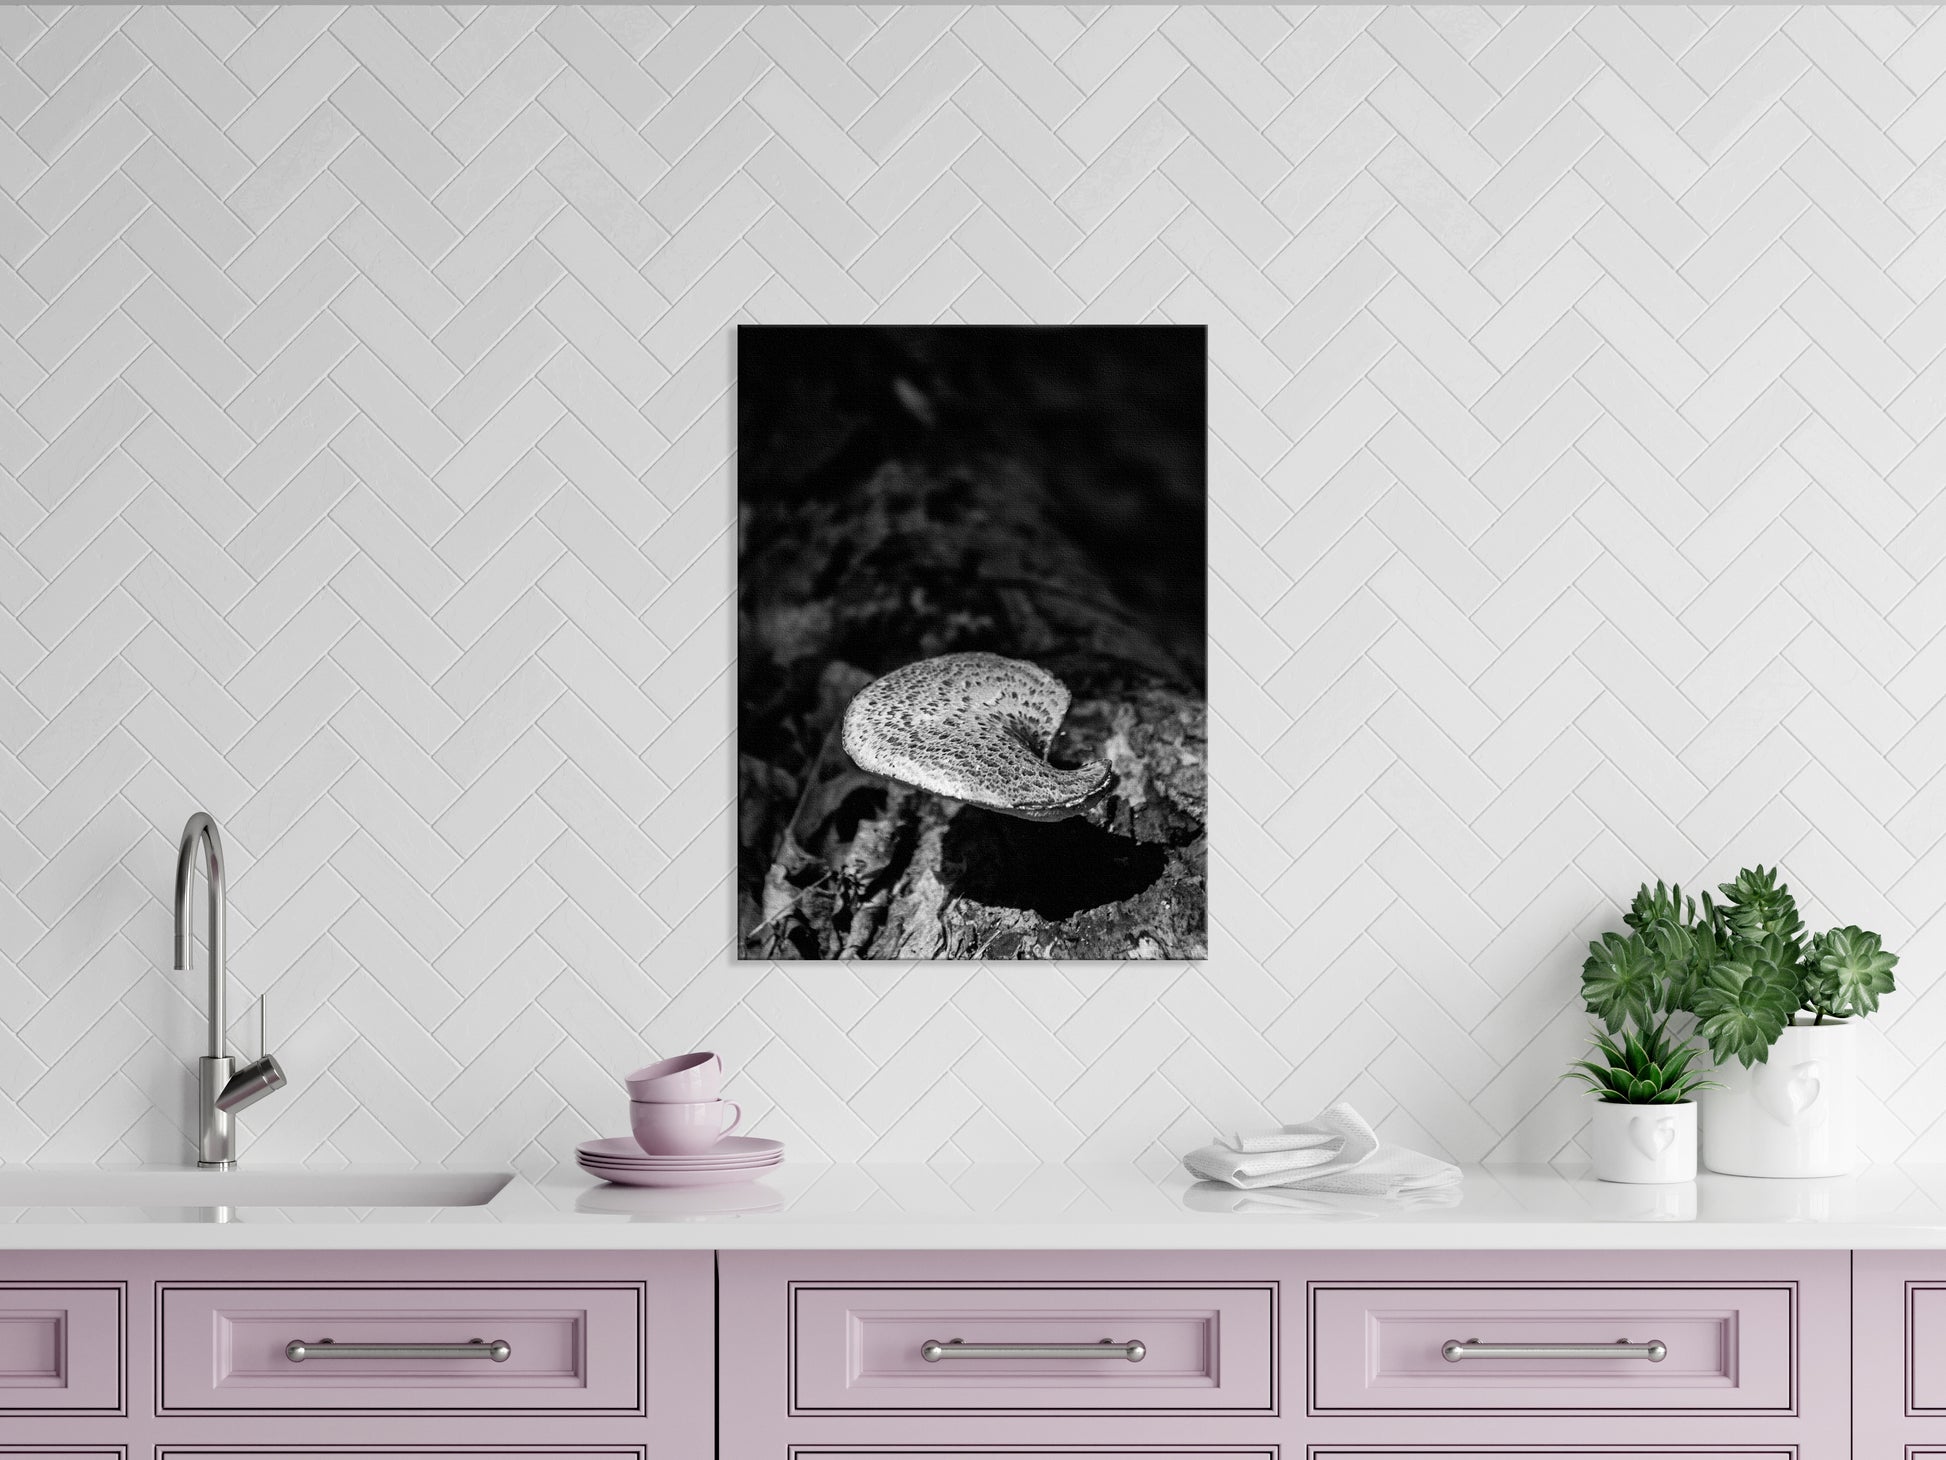 Art To Hang In Kitchen: Mushroom on Log Black and White Botanical Nature Canvas Wall Art Prints